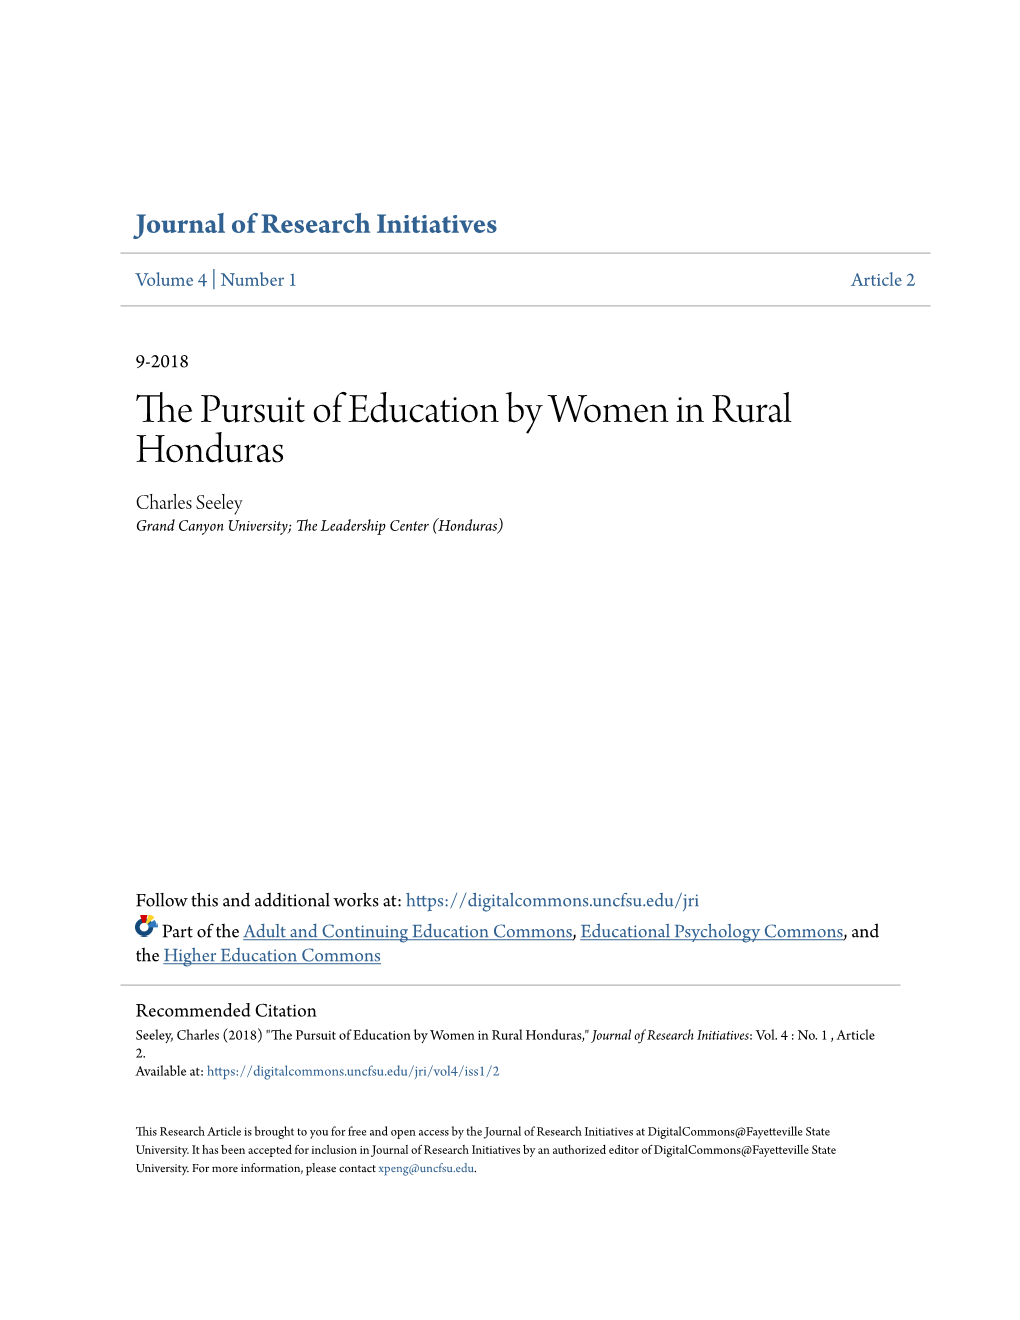 The Pursuit of Education by Women in Rural Honduras Charles Seeley Grand Canyon University; the Leadership Center (Honduras)